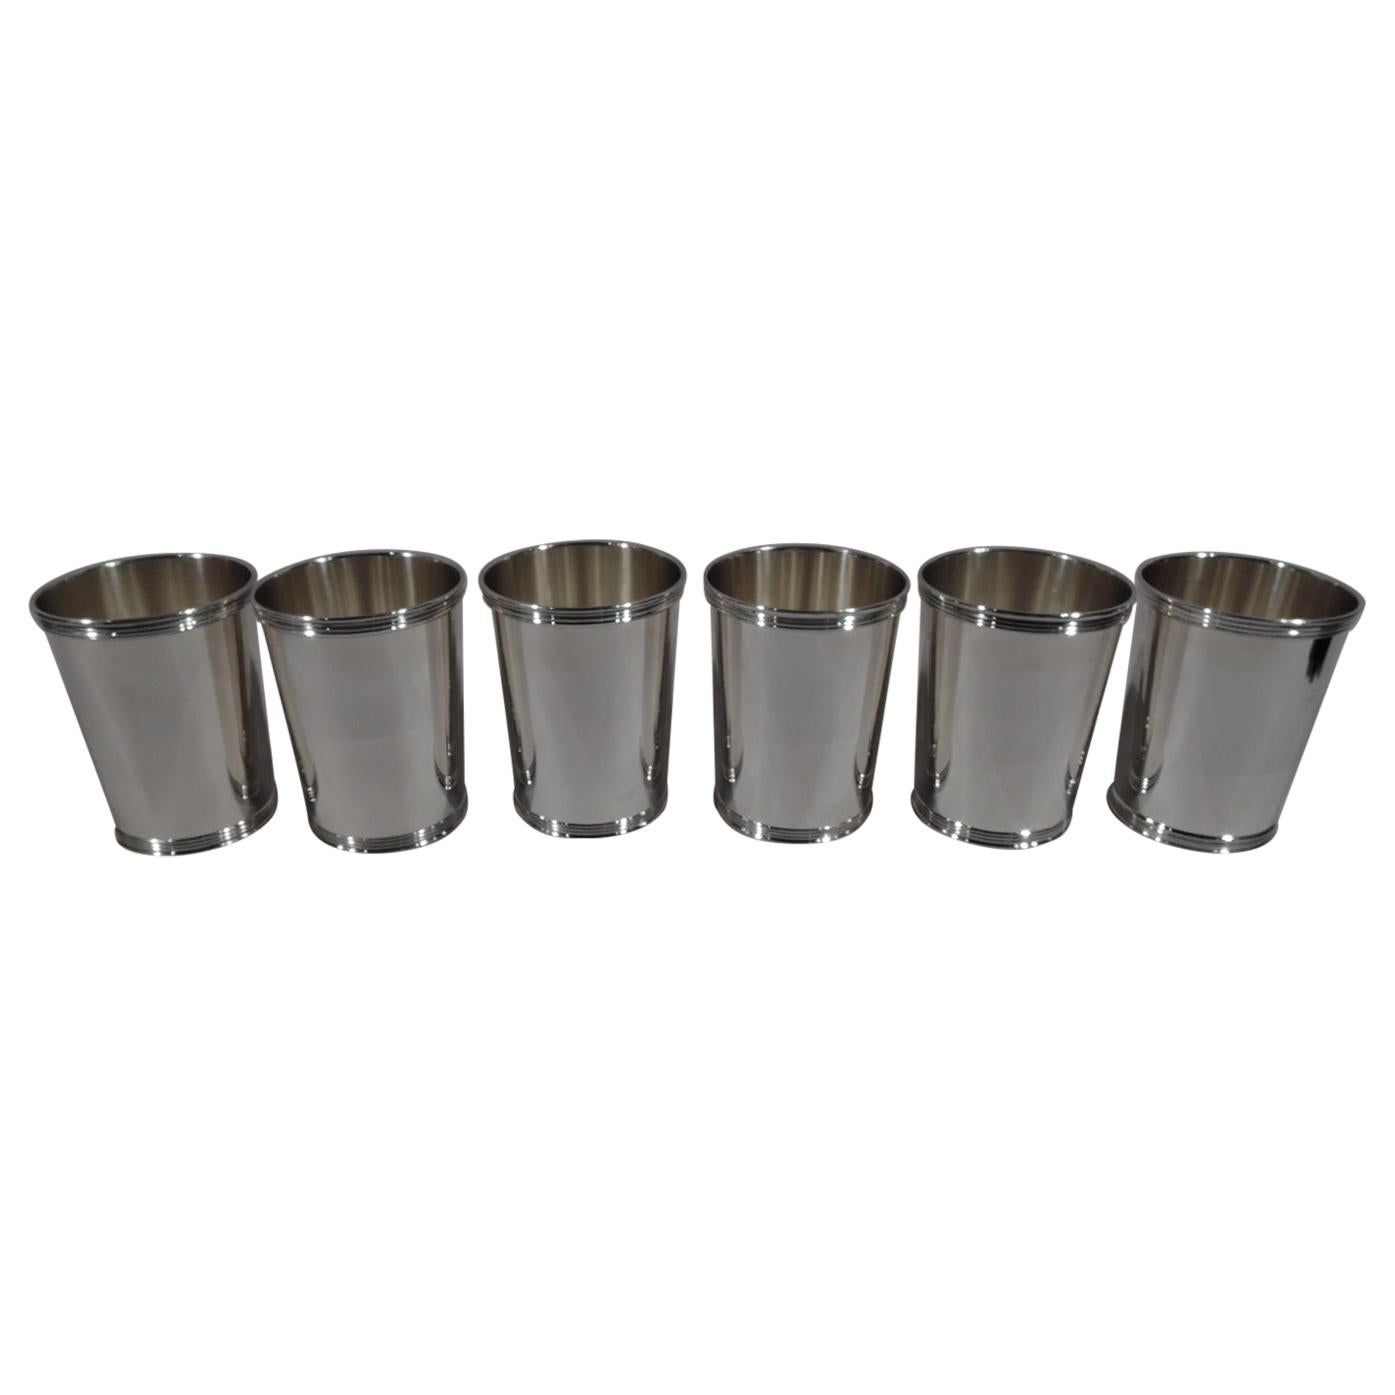 Set of 6 American Sterling Silver Mint Juleps by Manchester